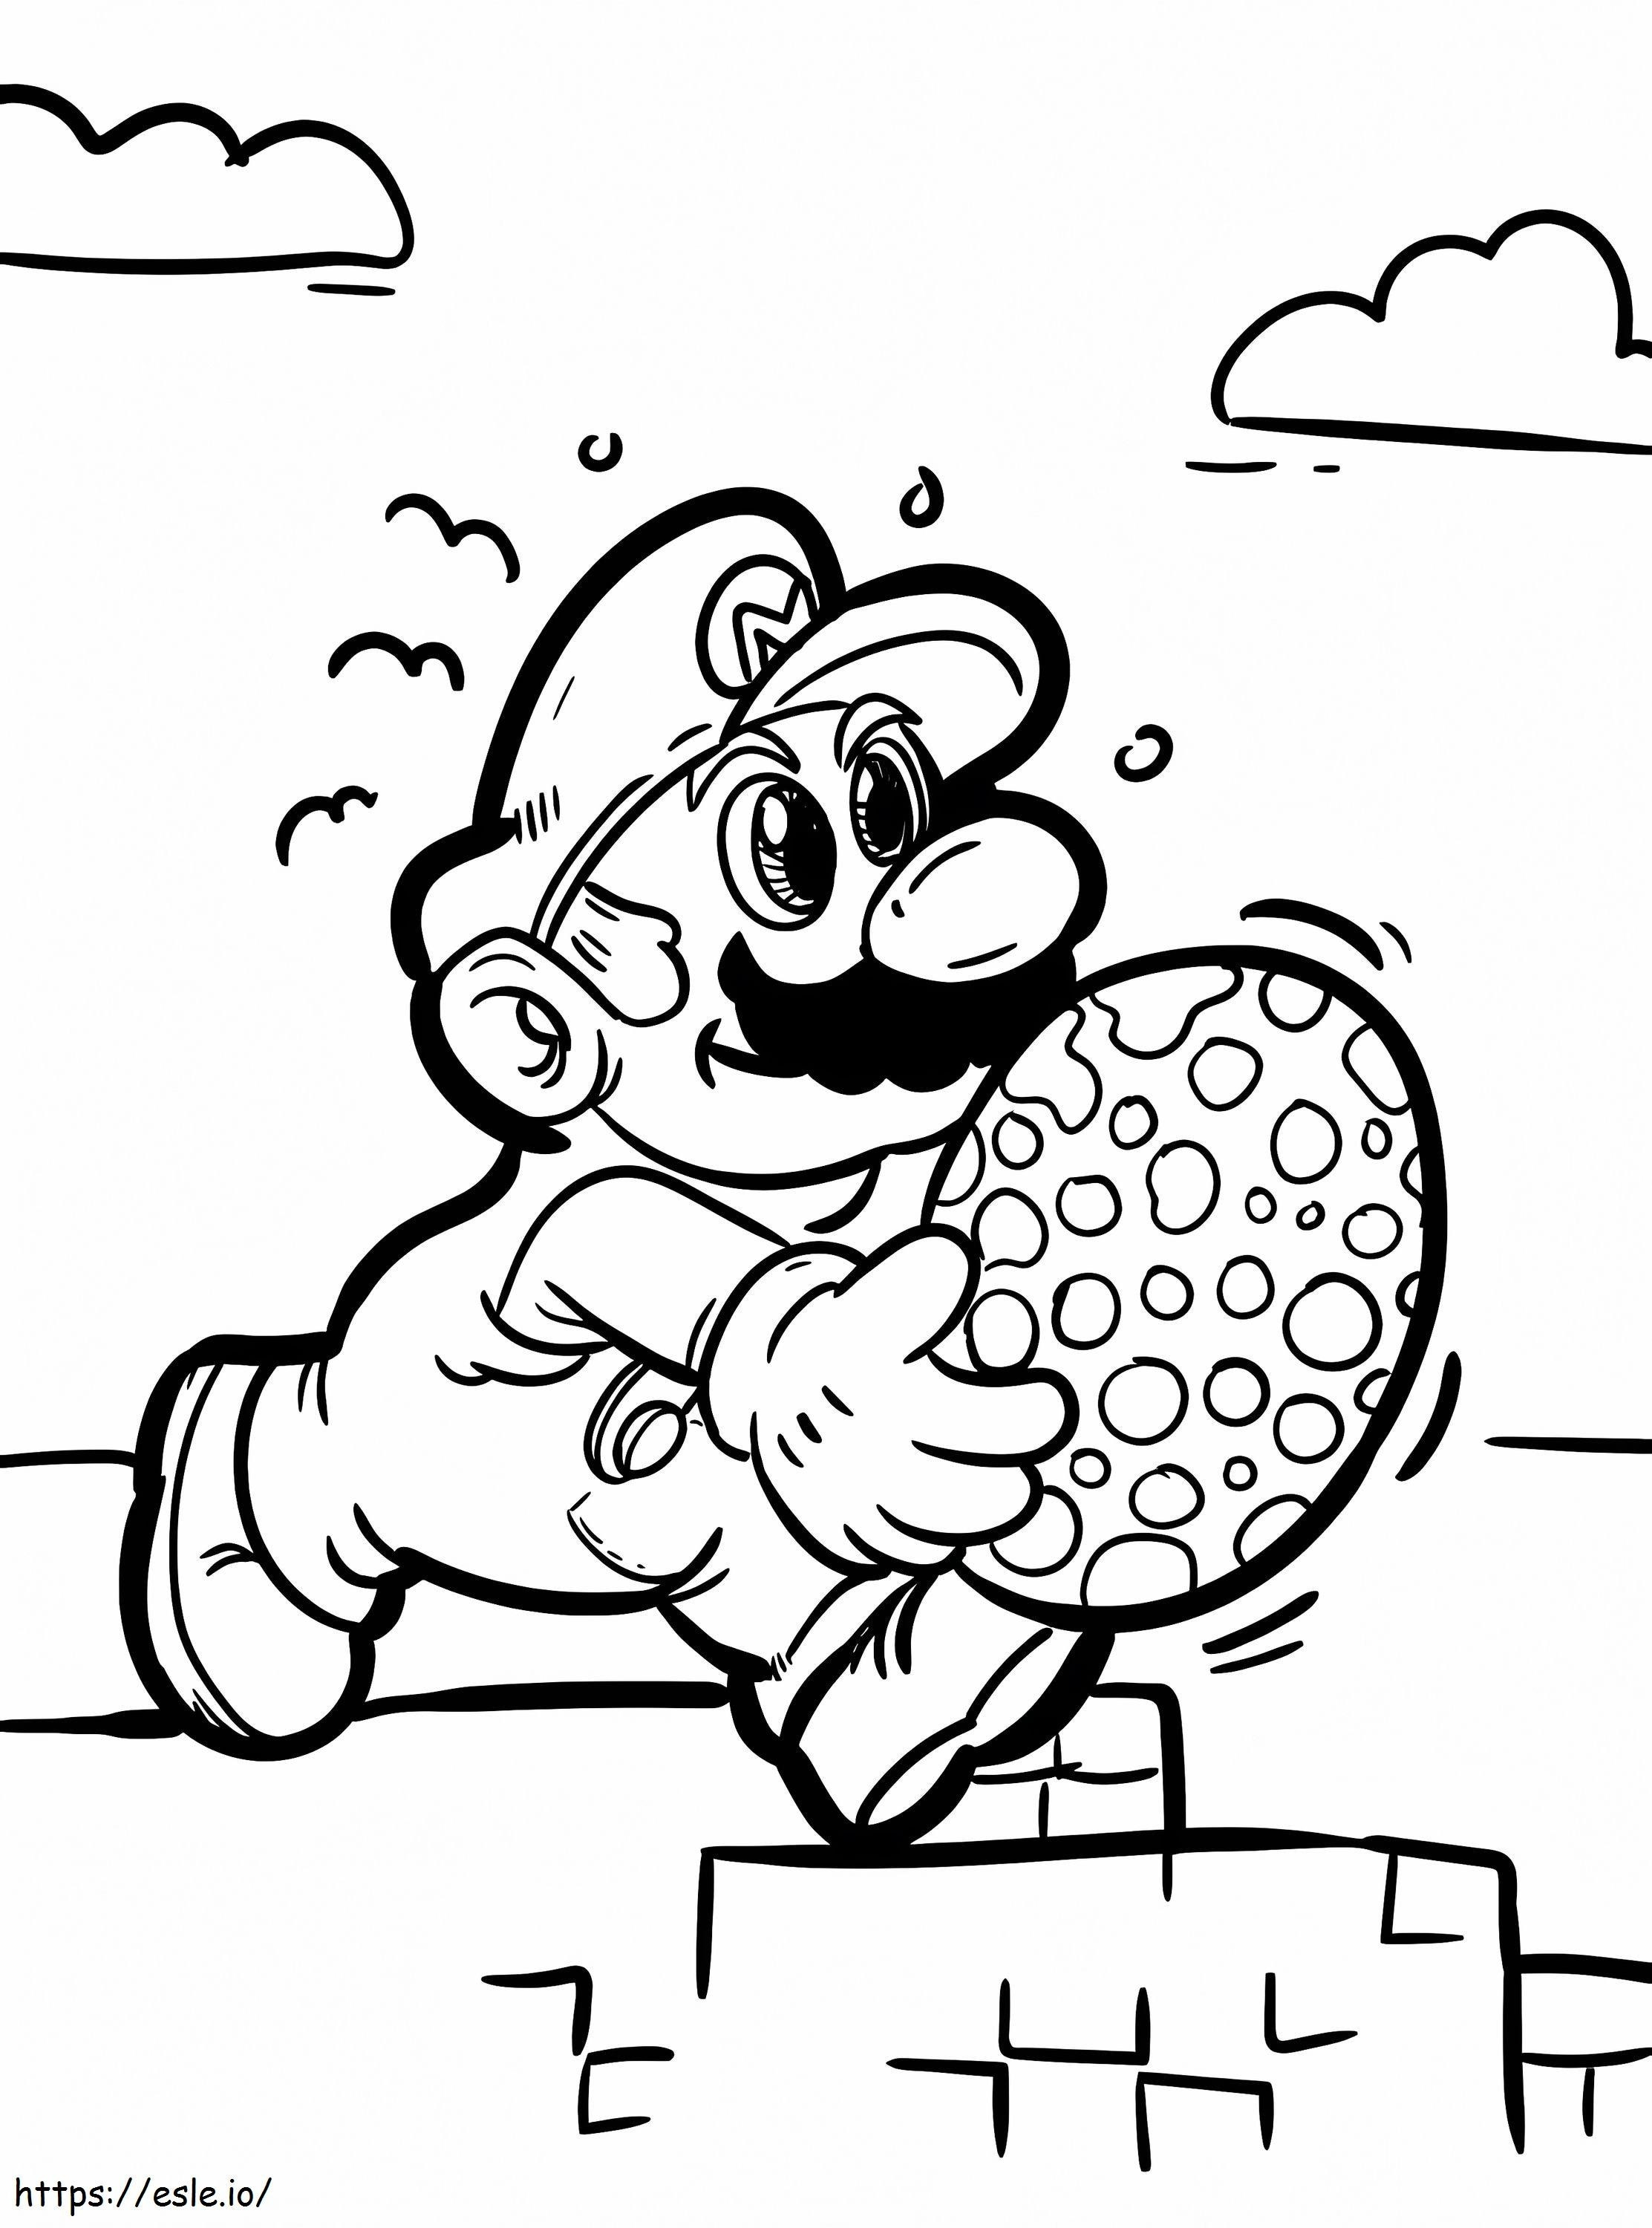 Mario And Egg coloring page